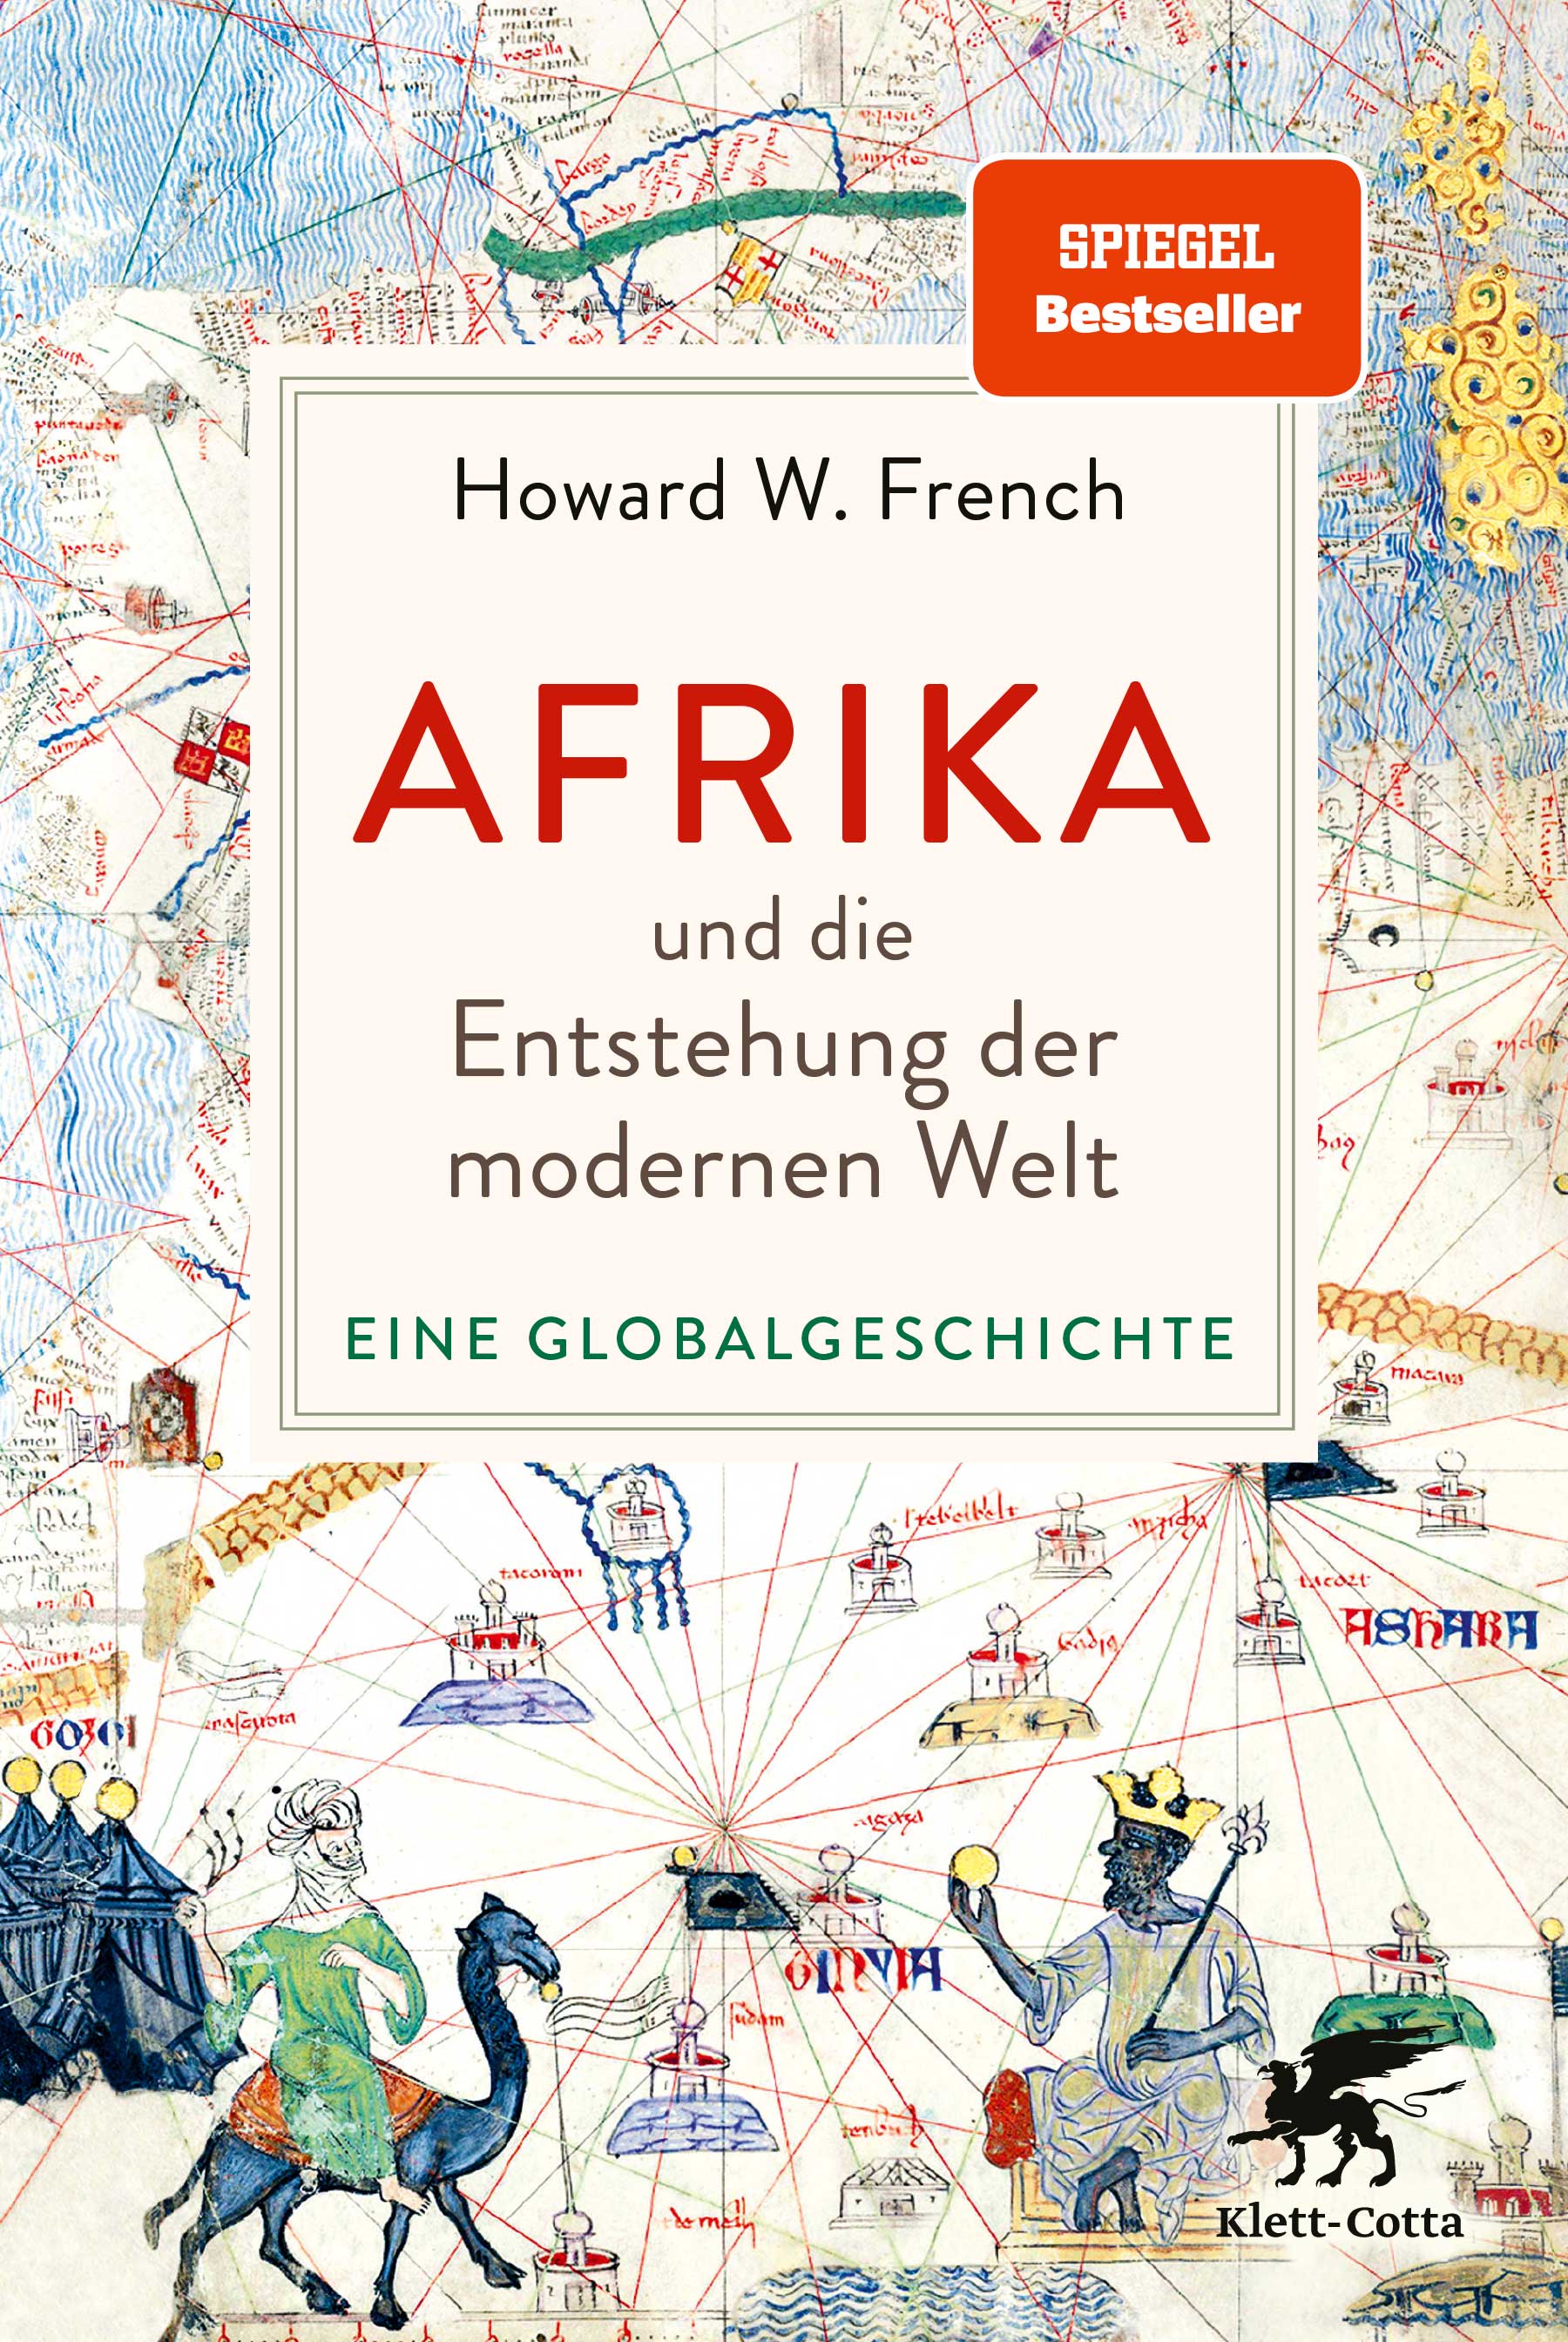 Review of the book “Africa and the Emergence of the Modern World”